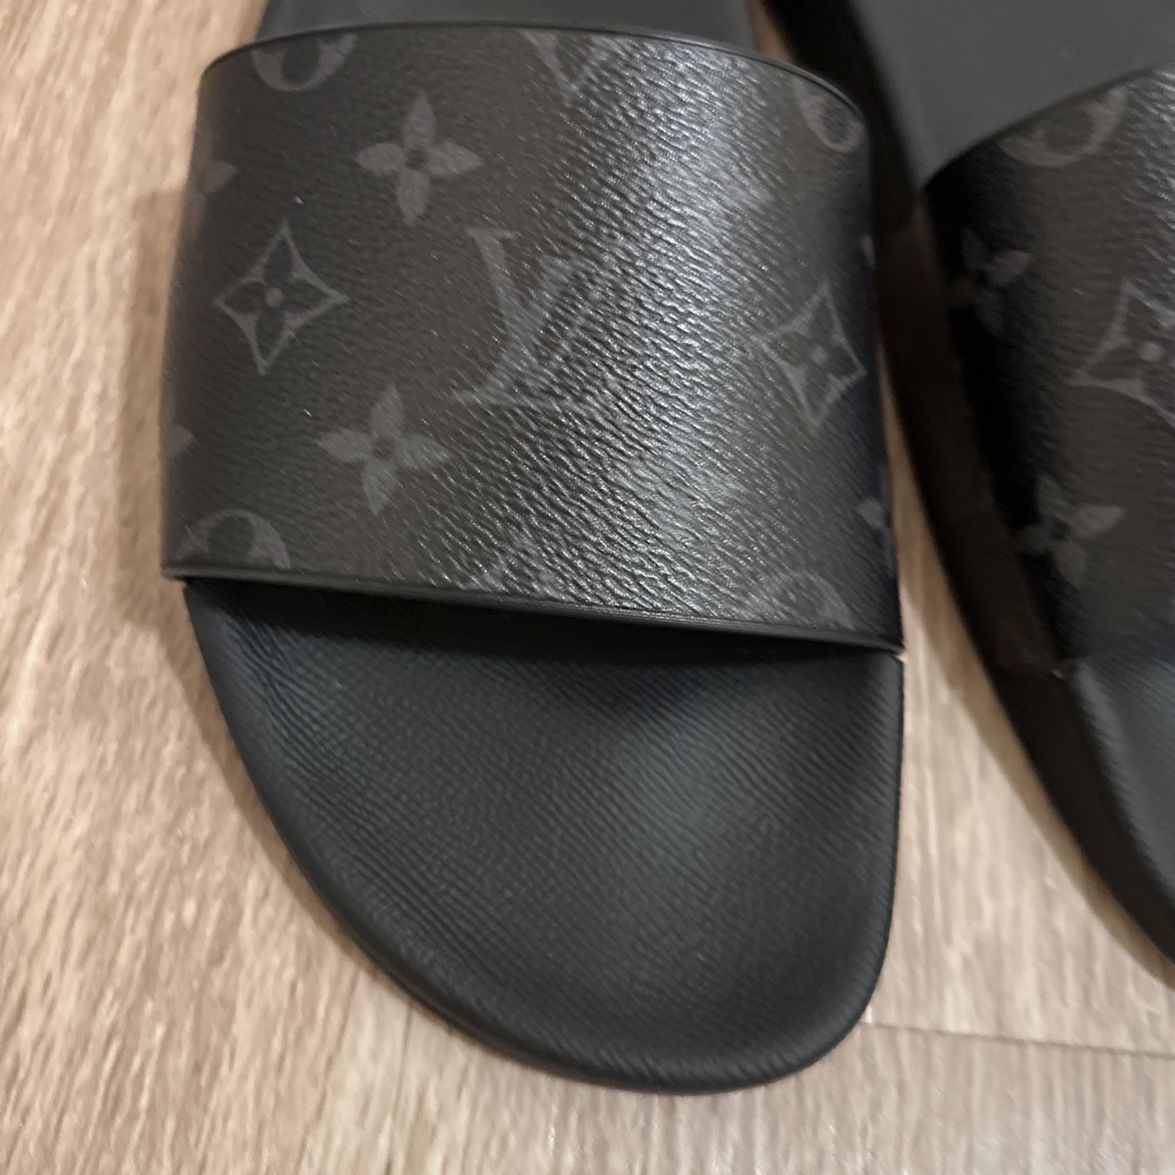 Louis Vuitton Waterfront Mule slides for Sale in San Diego, CA - OfferUp